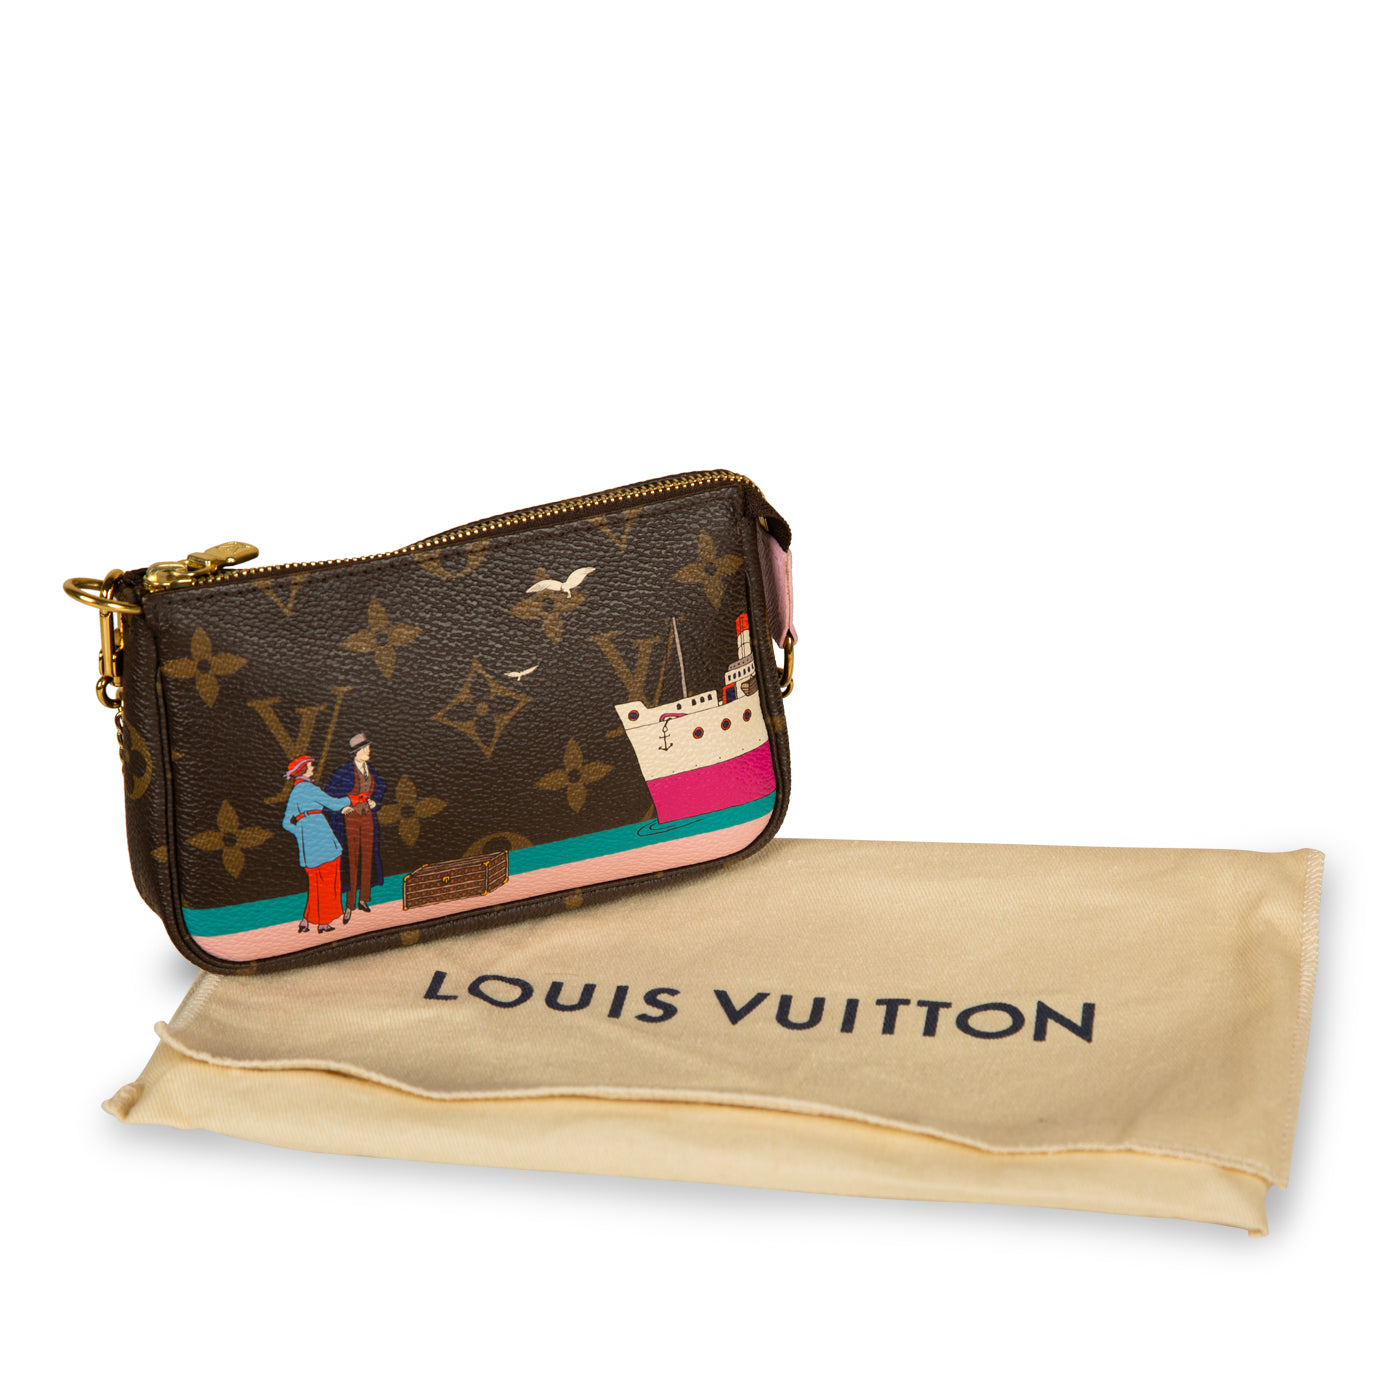 LOUIS VUITTON Cosmetic Pouch - More Than You Can Imagine